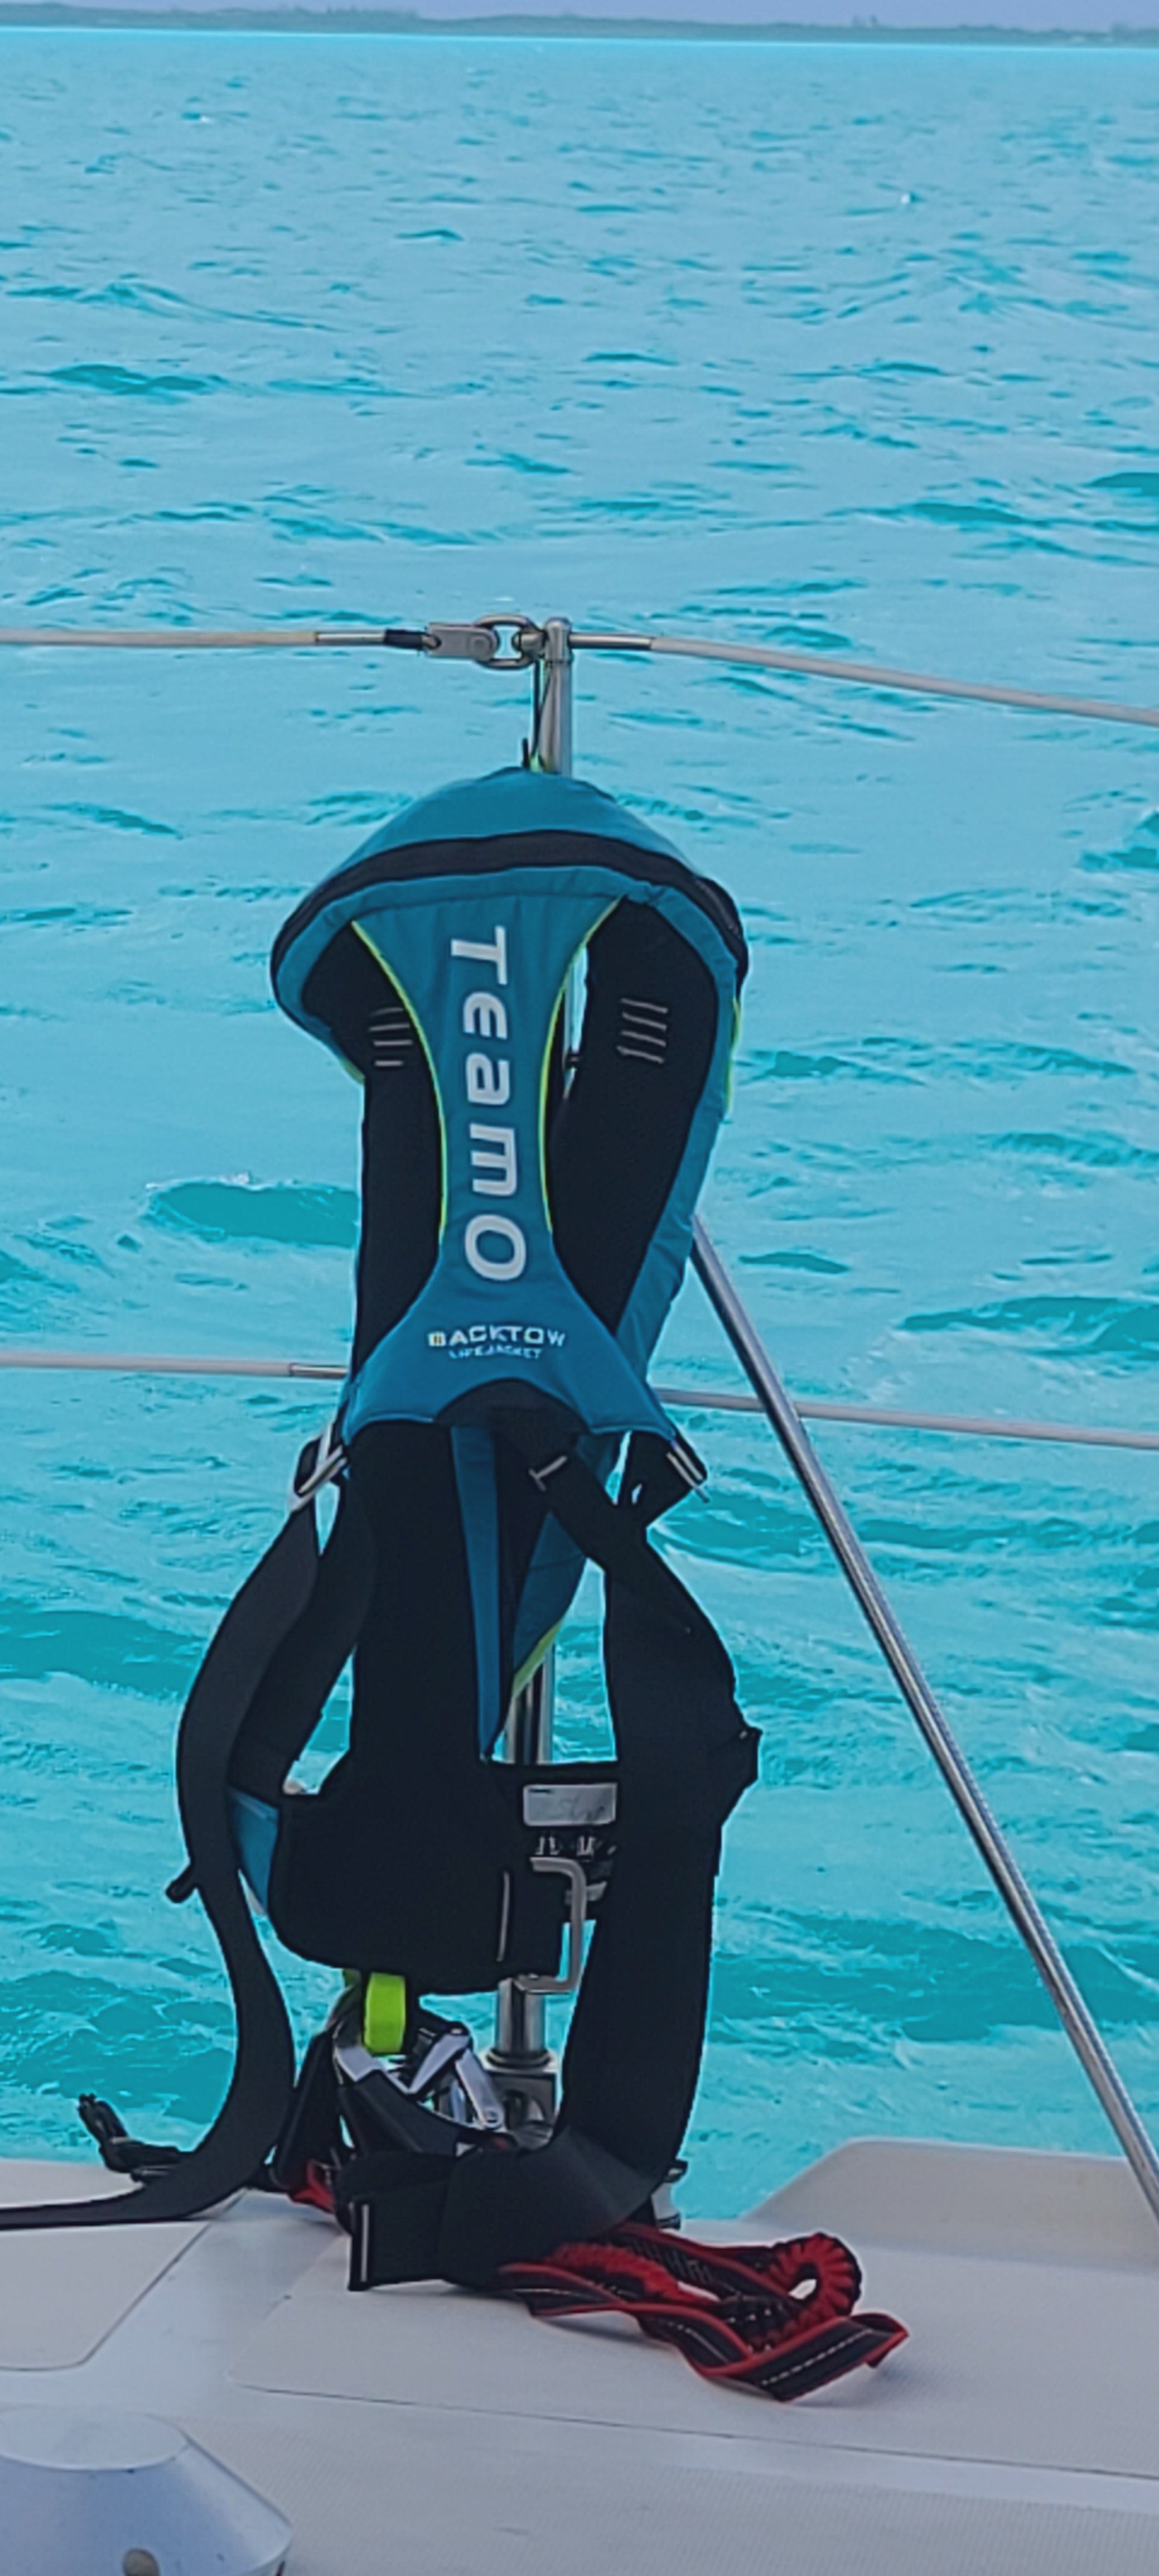 TeamO PFD in the bahamas offshore